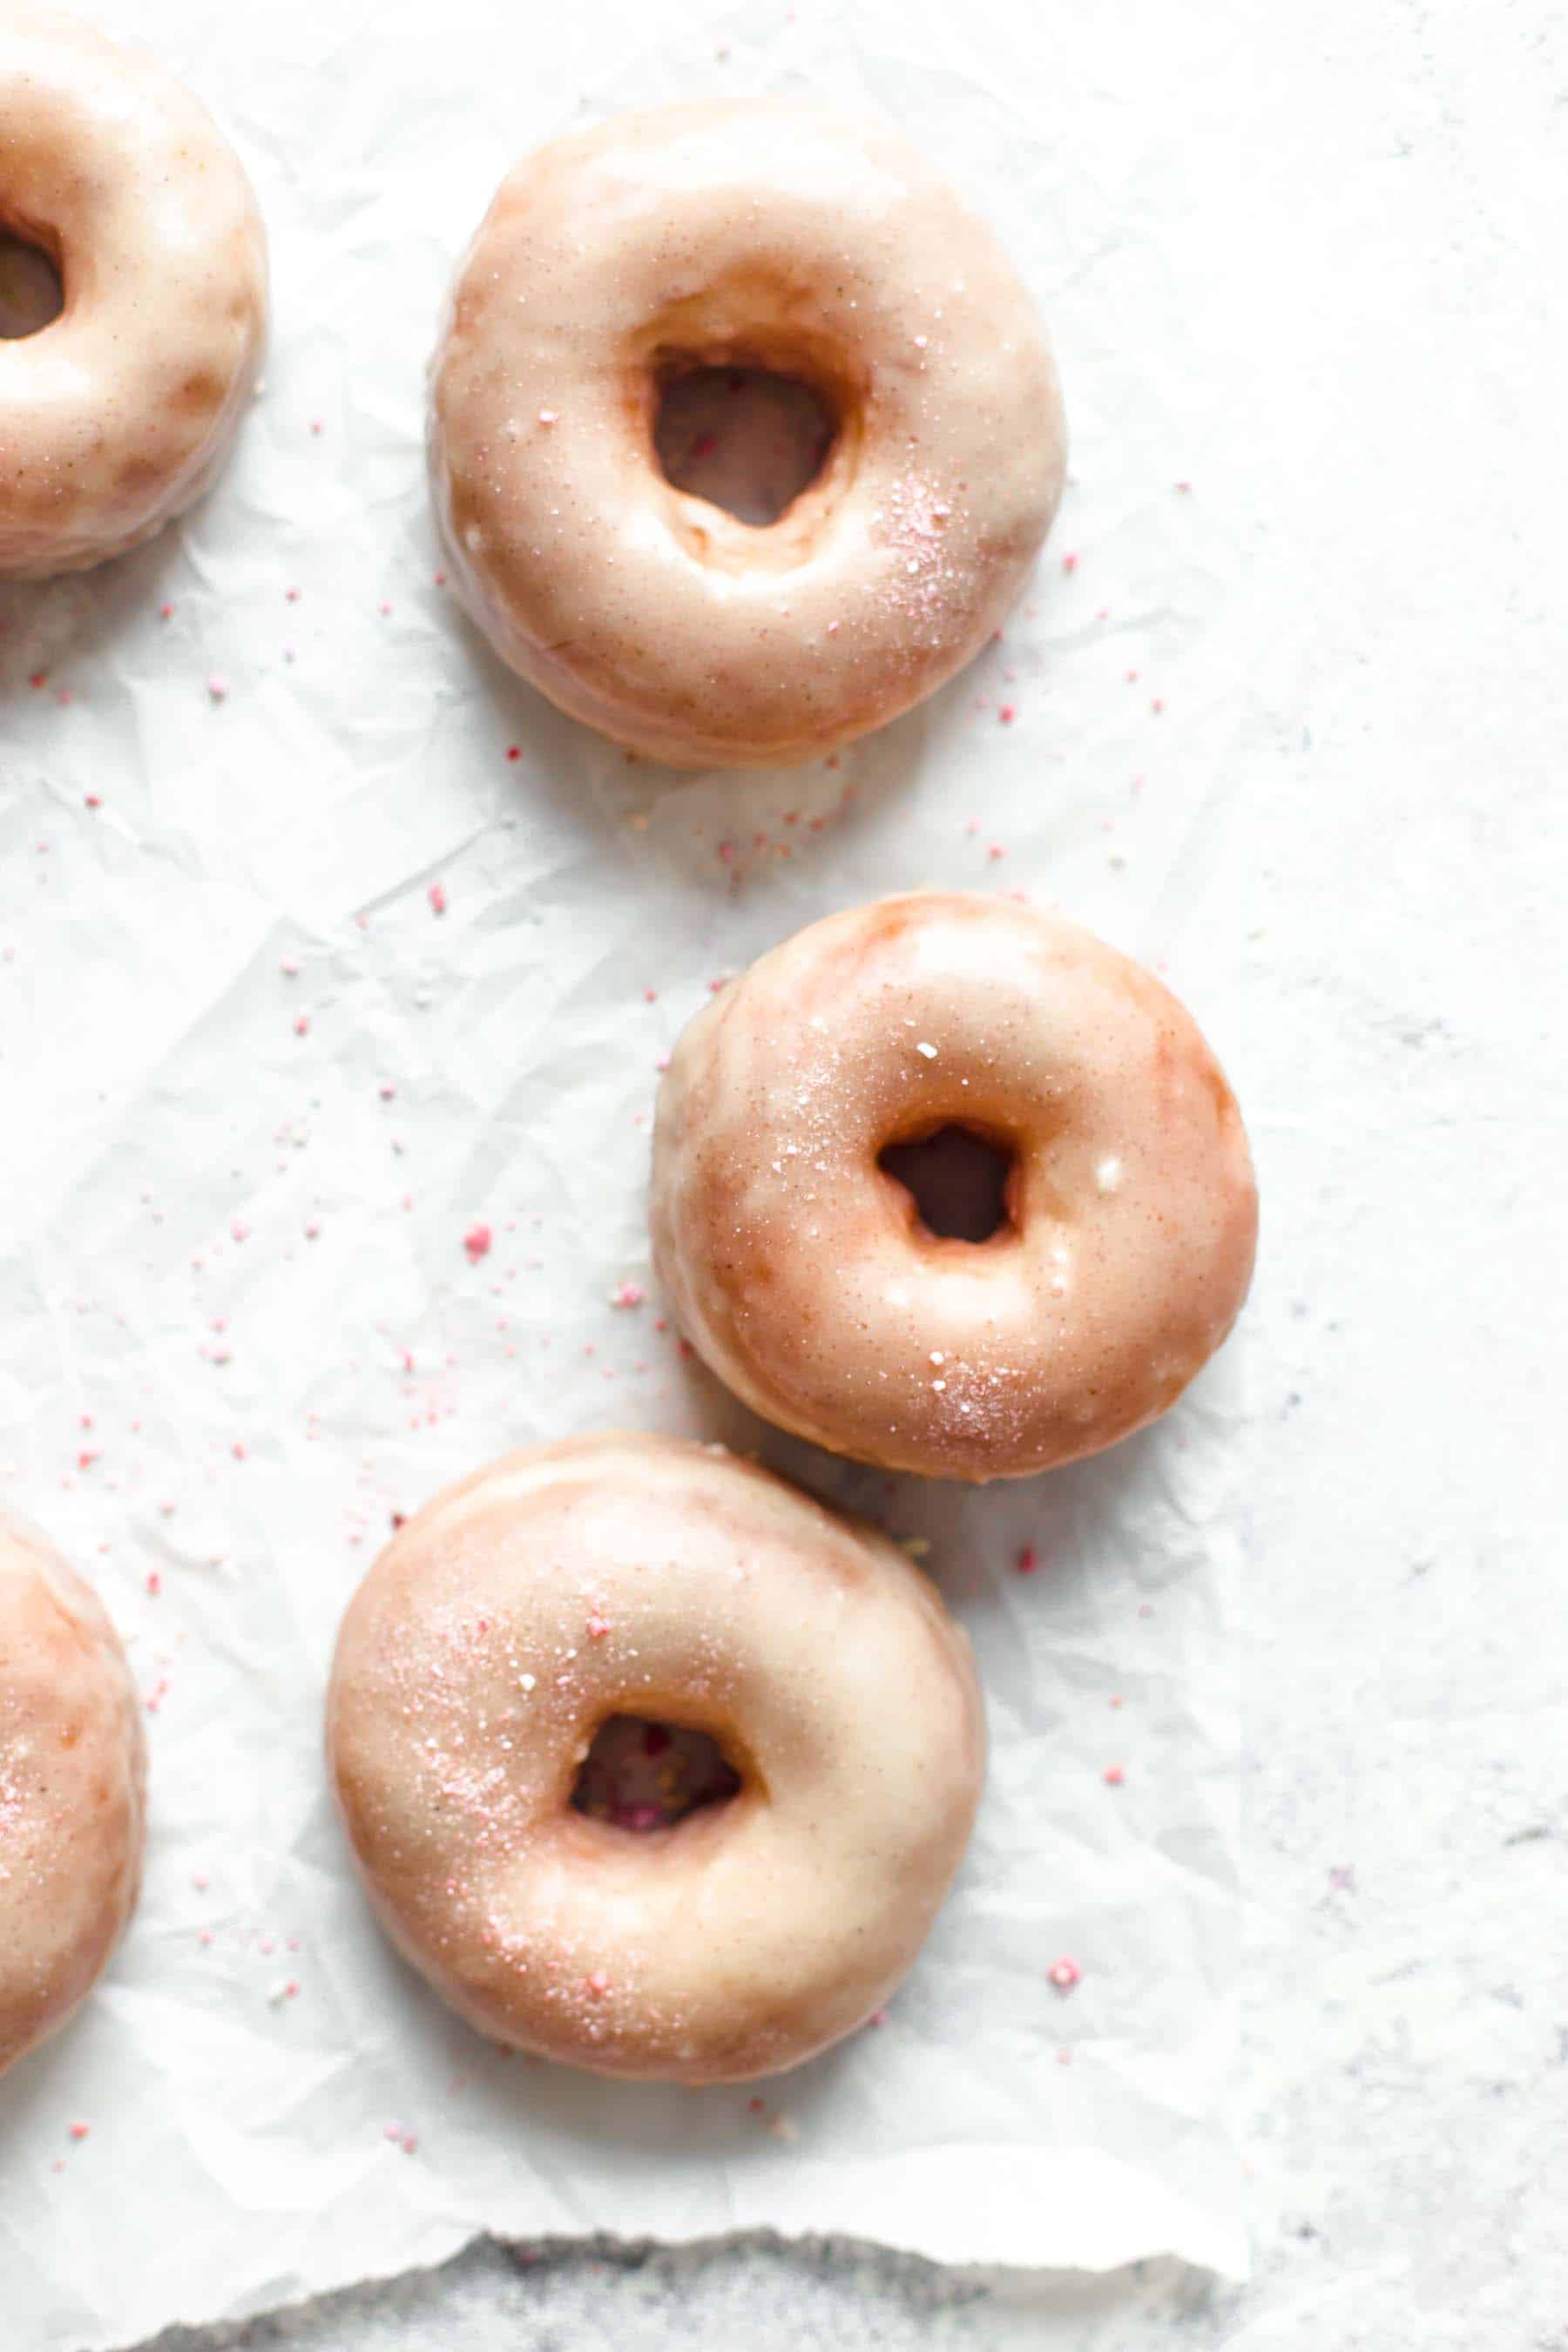 Homemade Glazed Doughnuts - Also The Crumbs Please